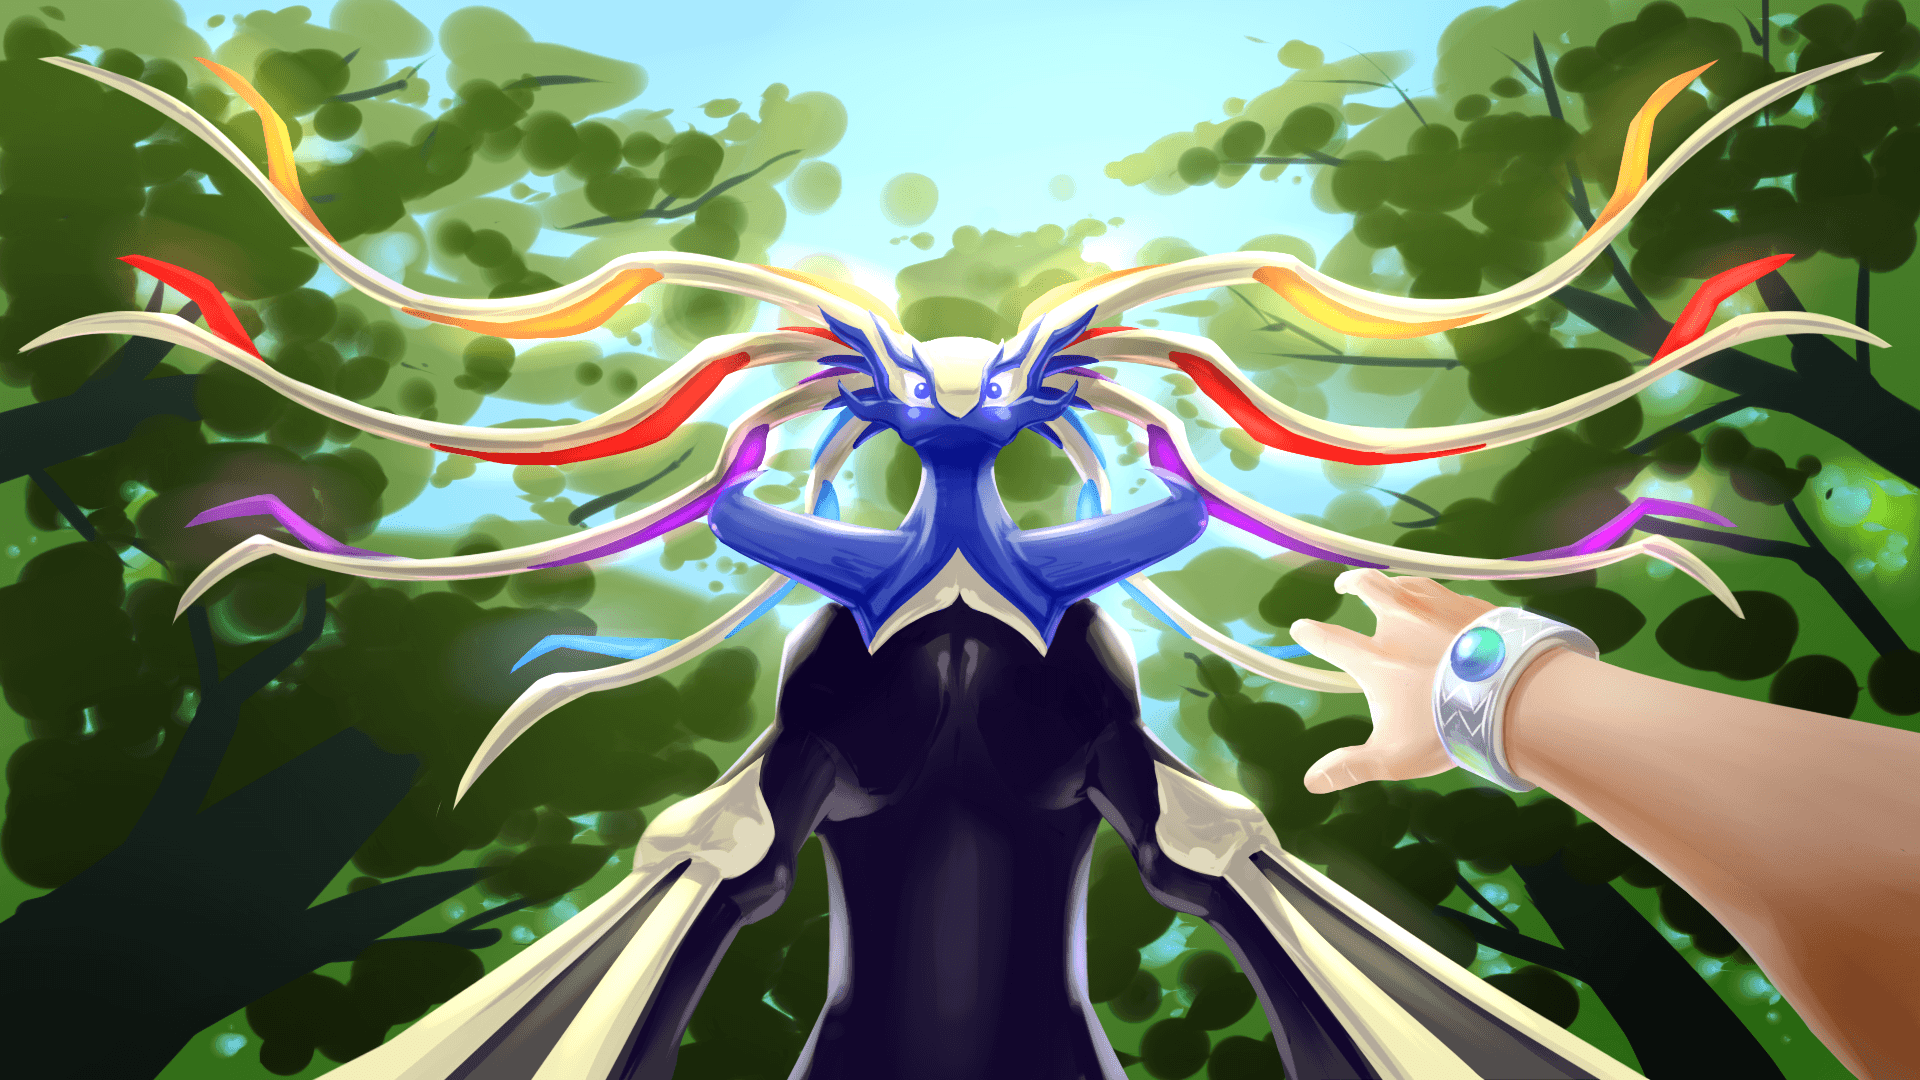 Xerneas Wallpaper Image Photo Picture Background